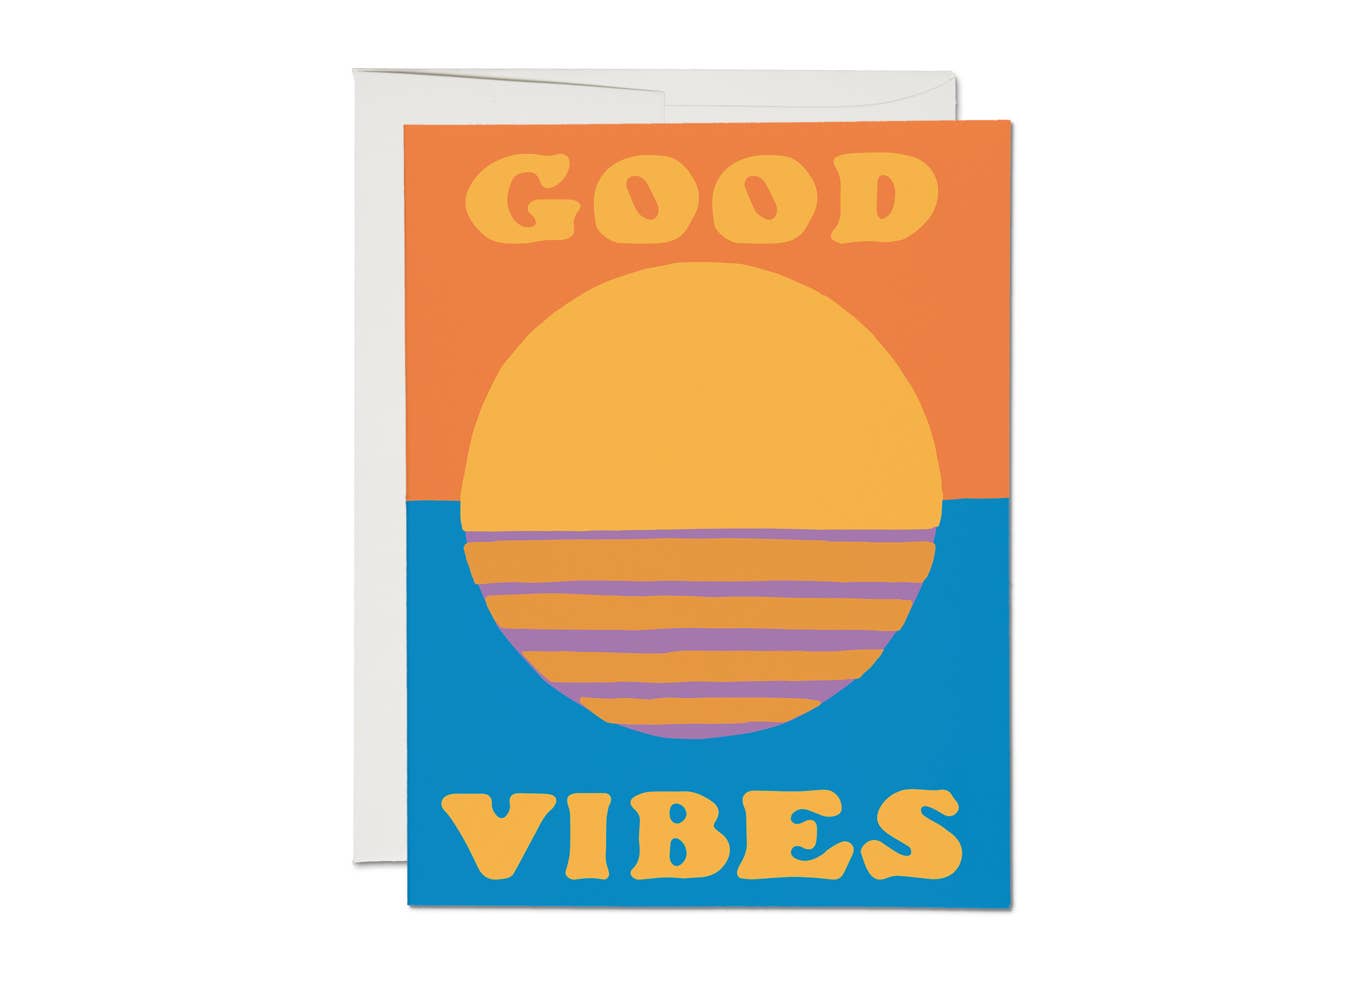 Sunny Vibes encouragement greeting card